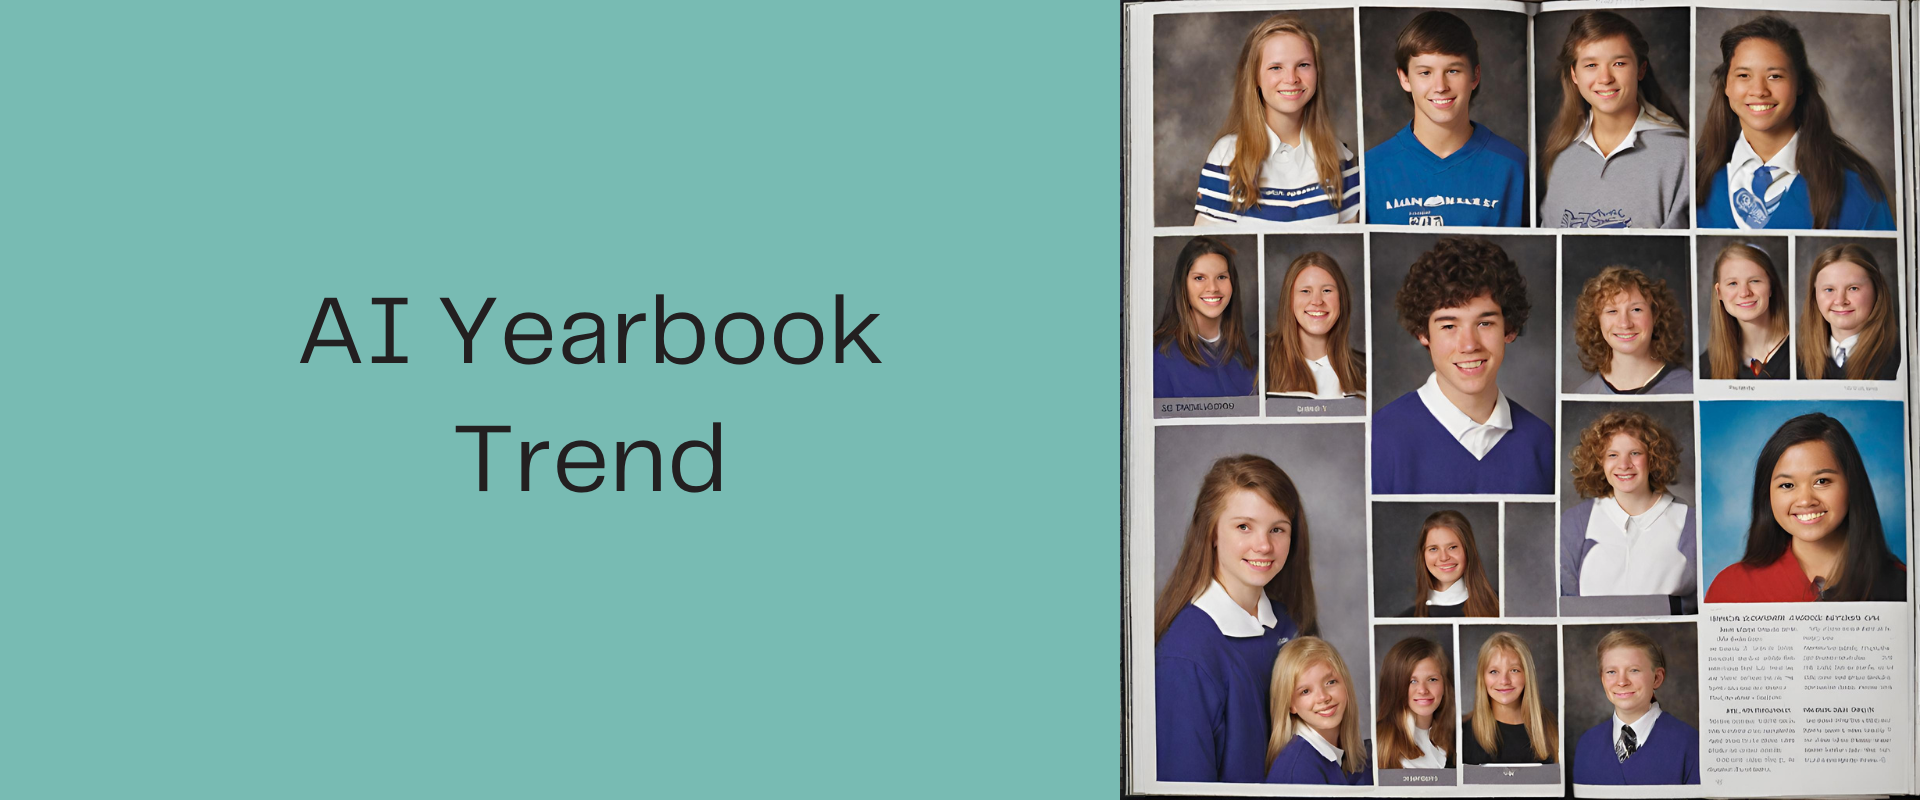 AI Yearbook Trend: How To Do Viral Ai 90s Photo Trend For Free